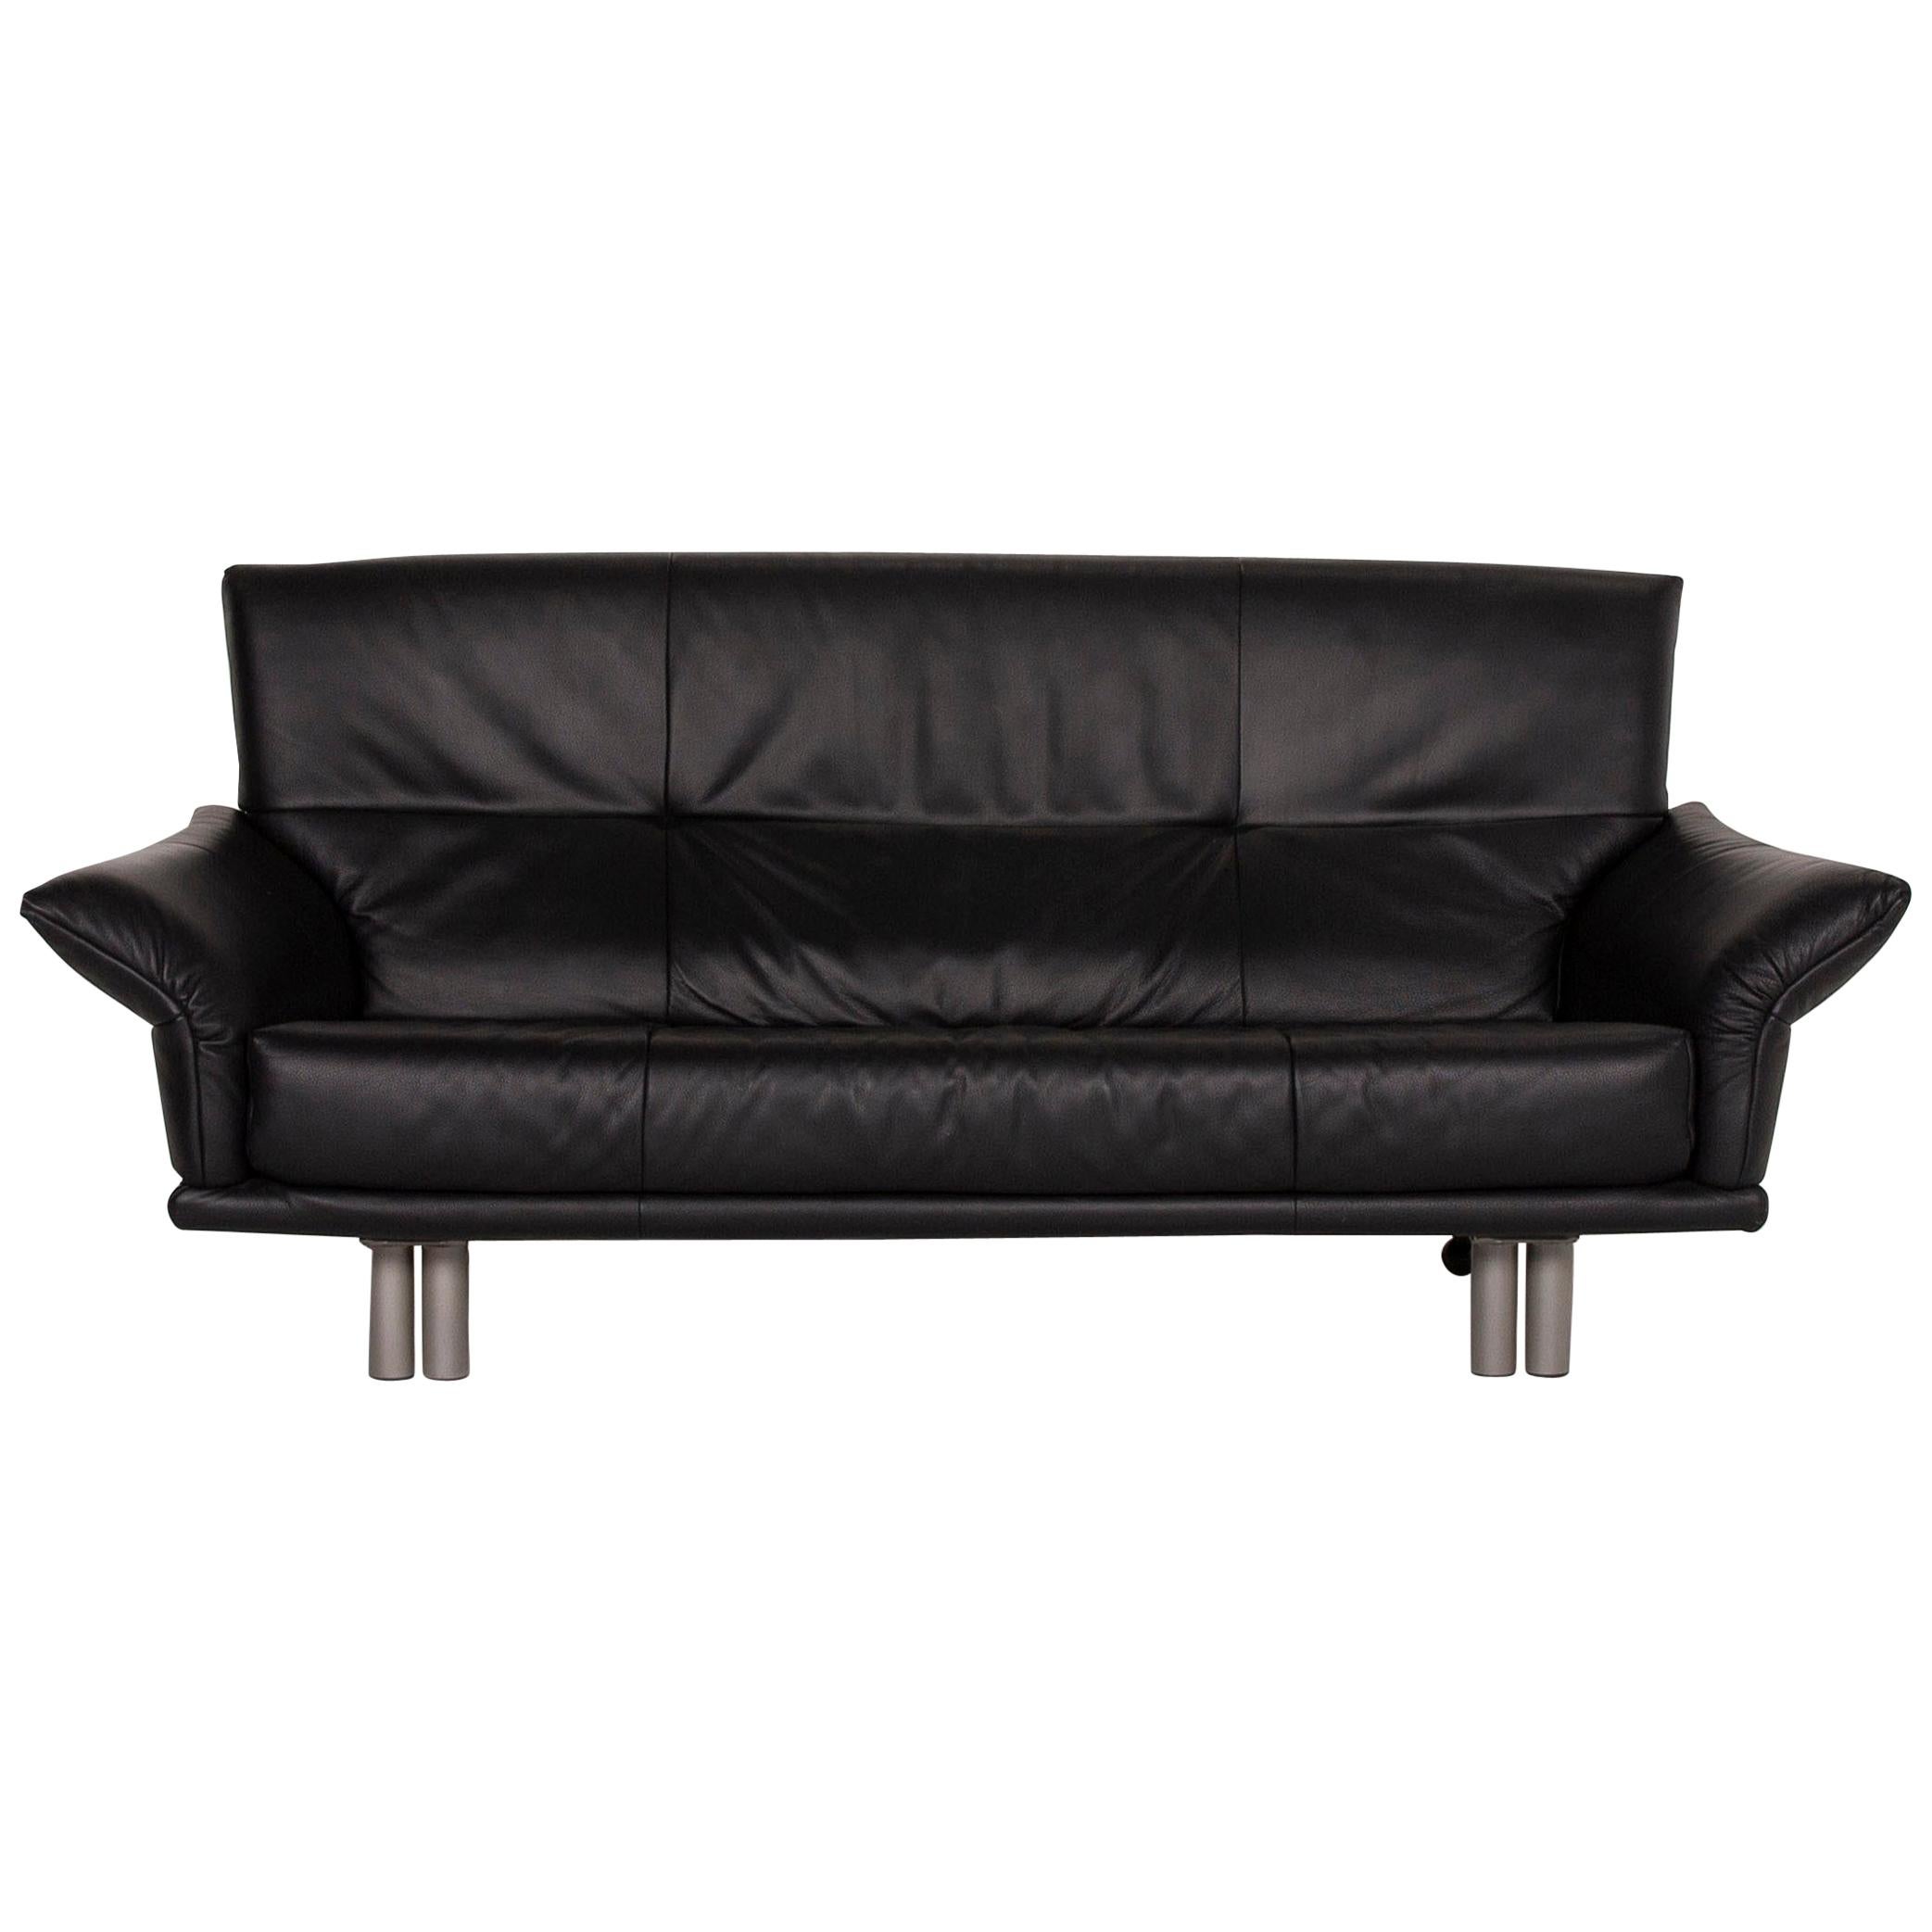 Rolf Benz Leather Sofa Black Three-Seat For Sale